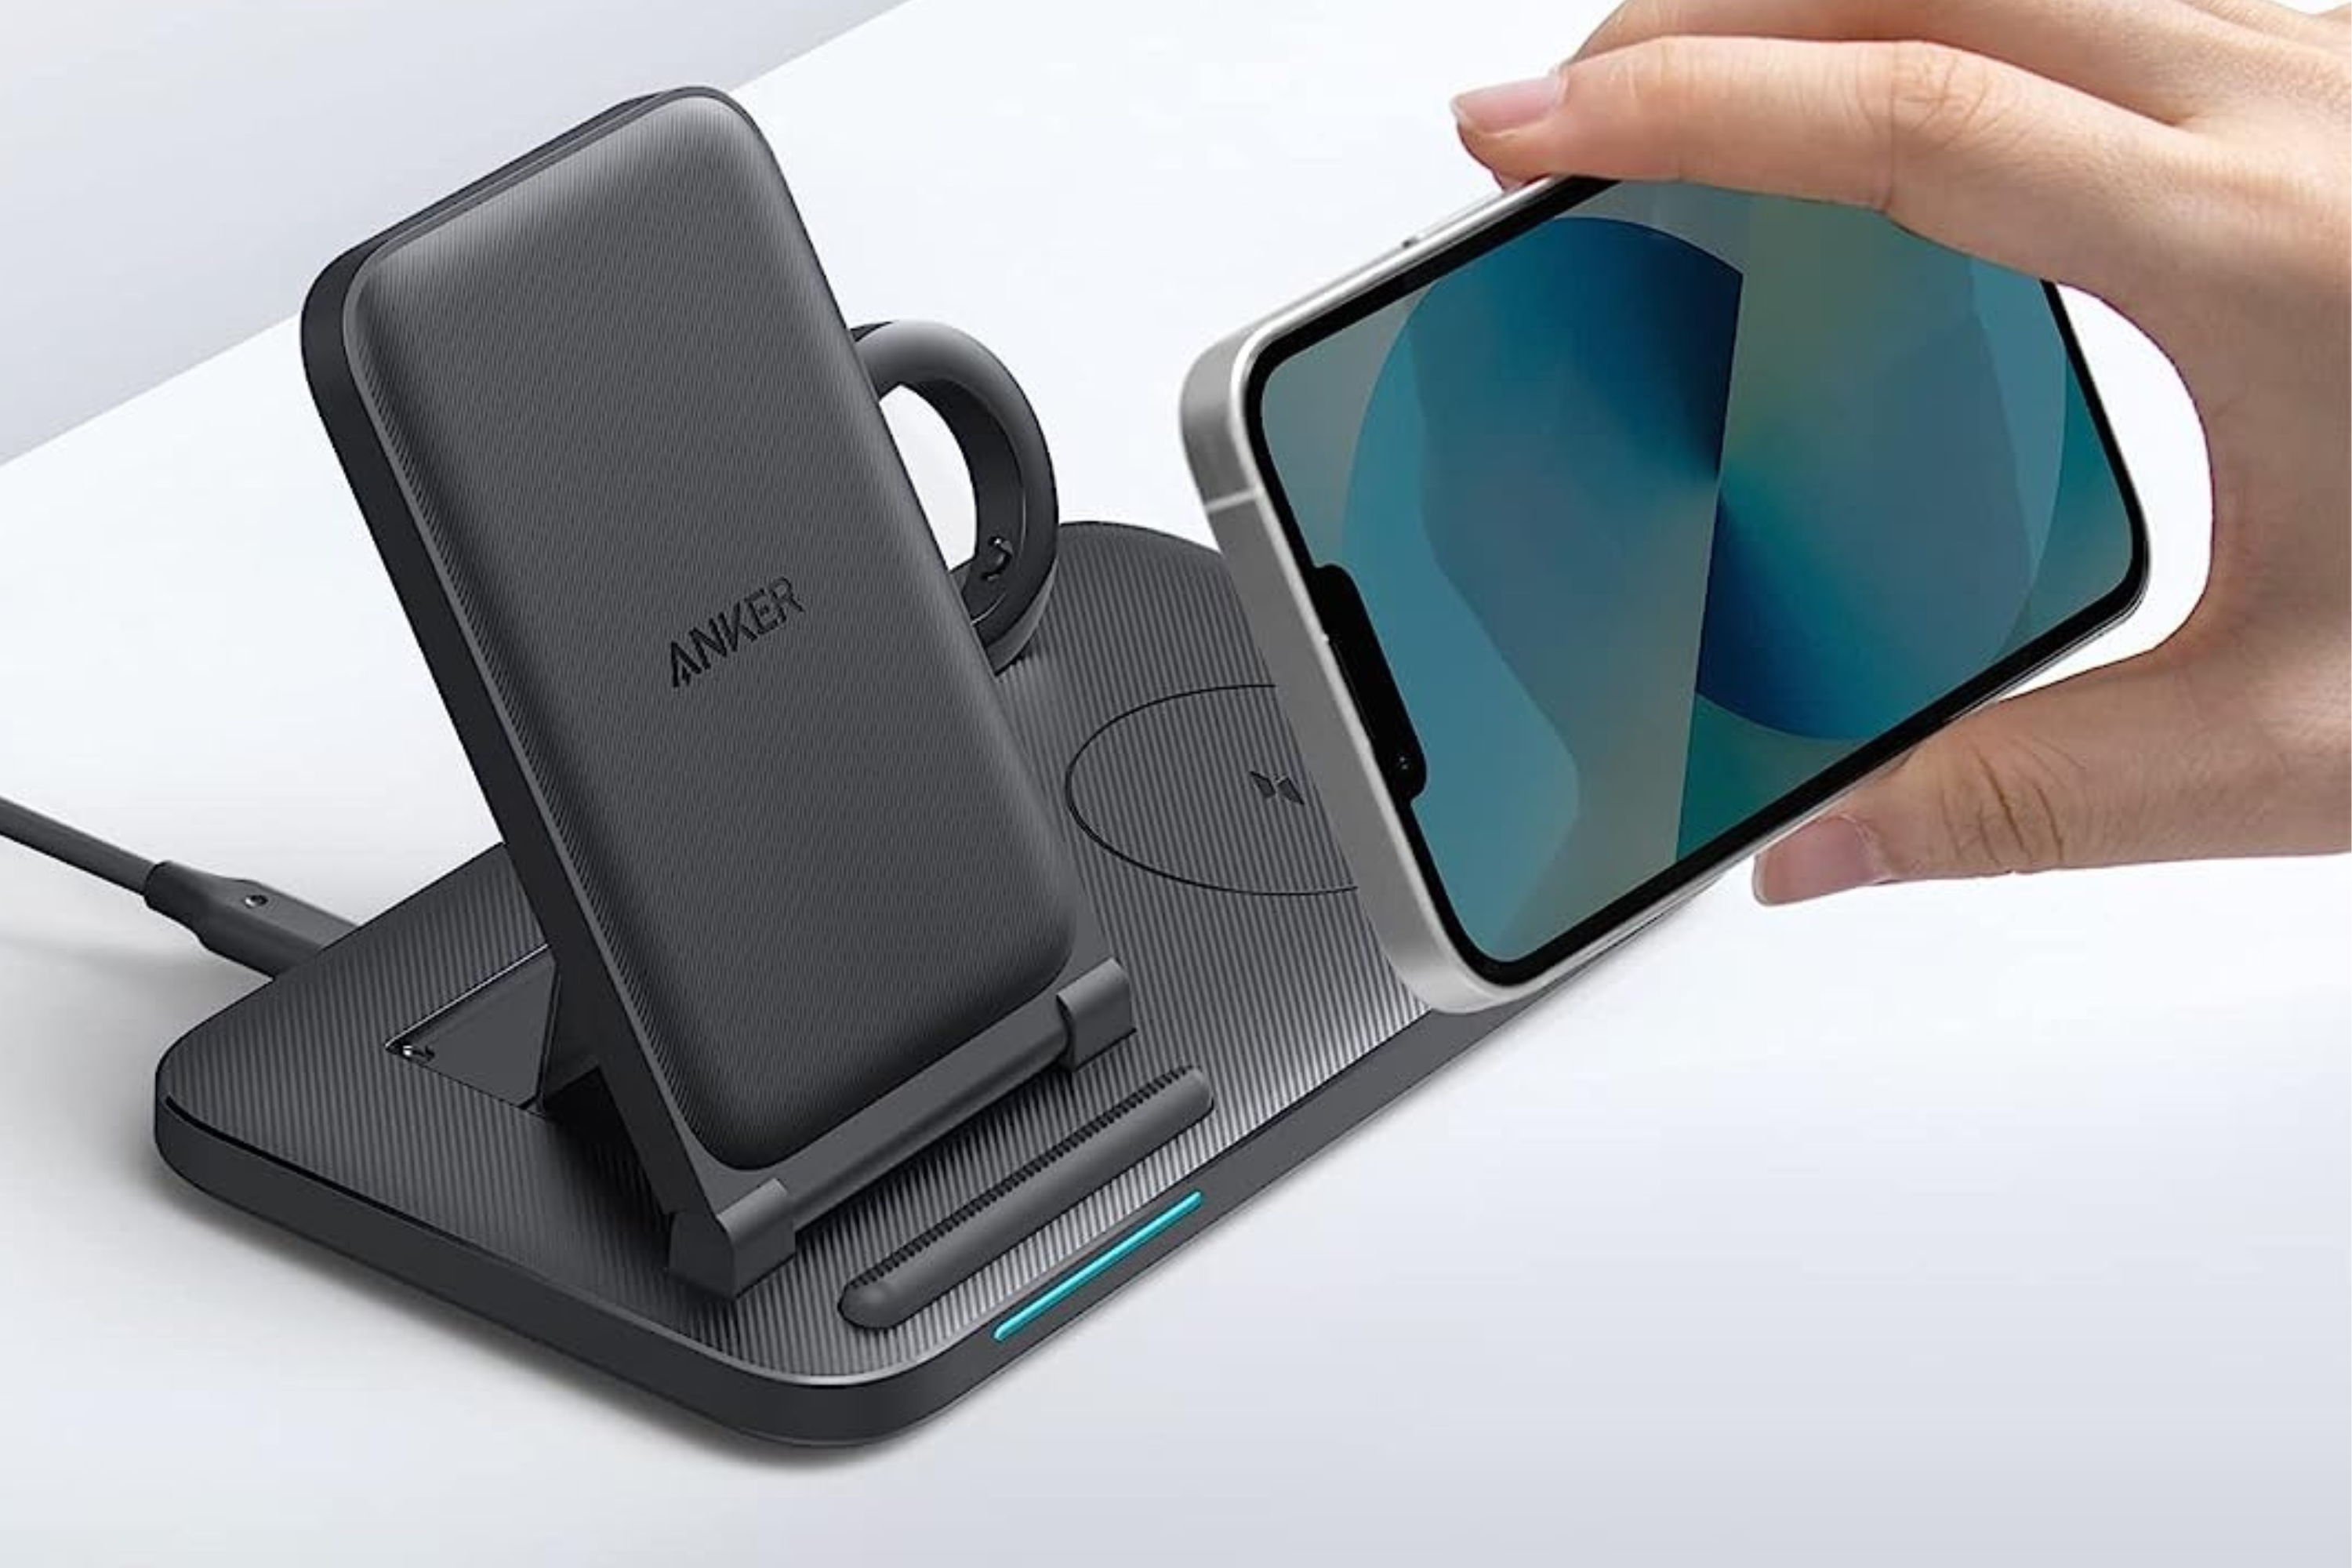 Anker 335 charging station with phone being charged